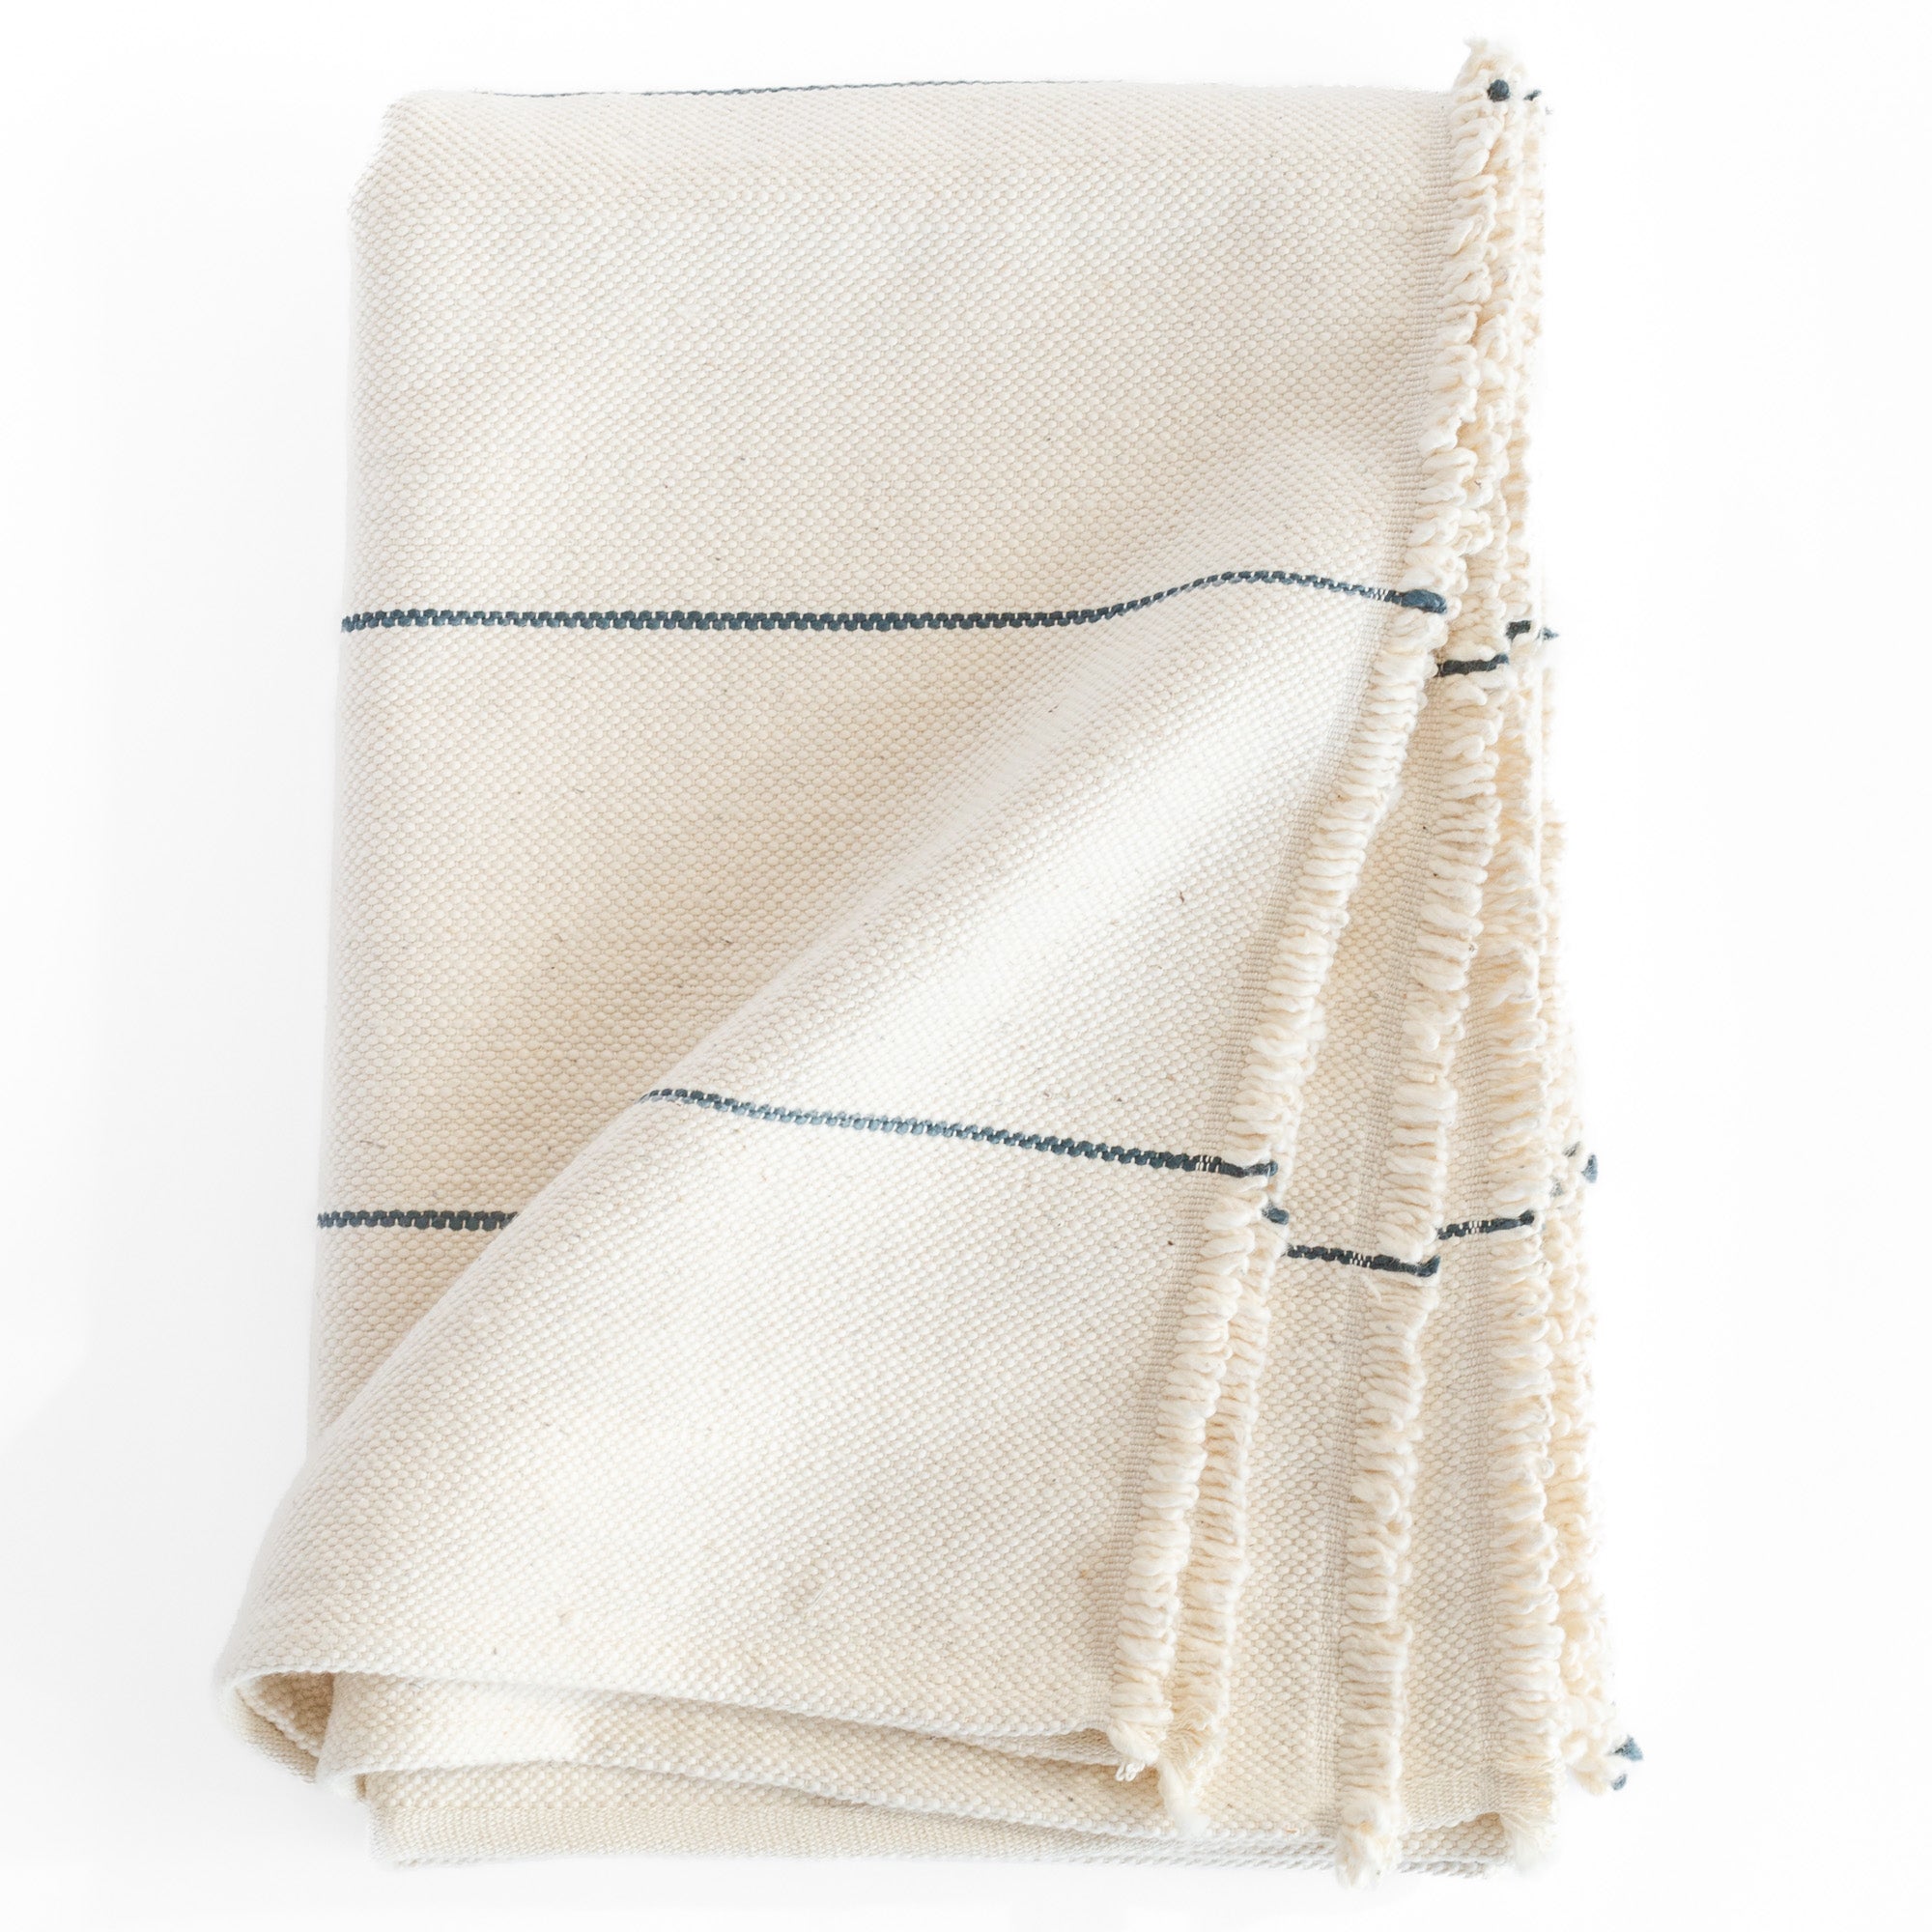 Lyra Throw Blanket, a cream and navy stripe cotton hand loomed throw blanket from Tonic Living